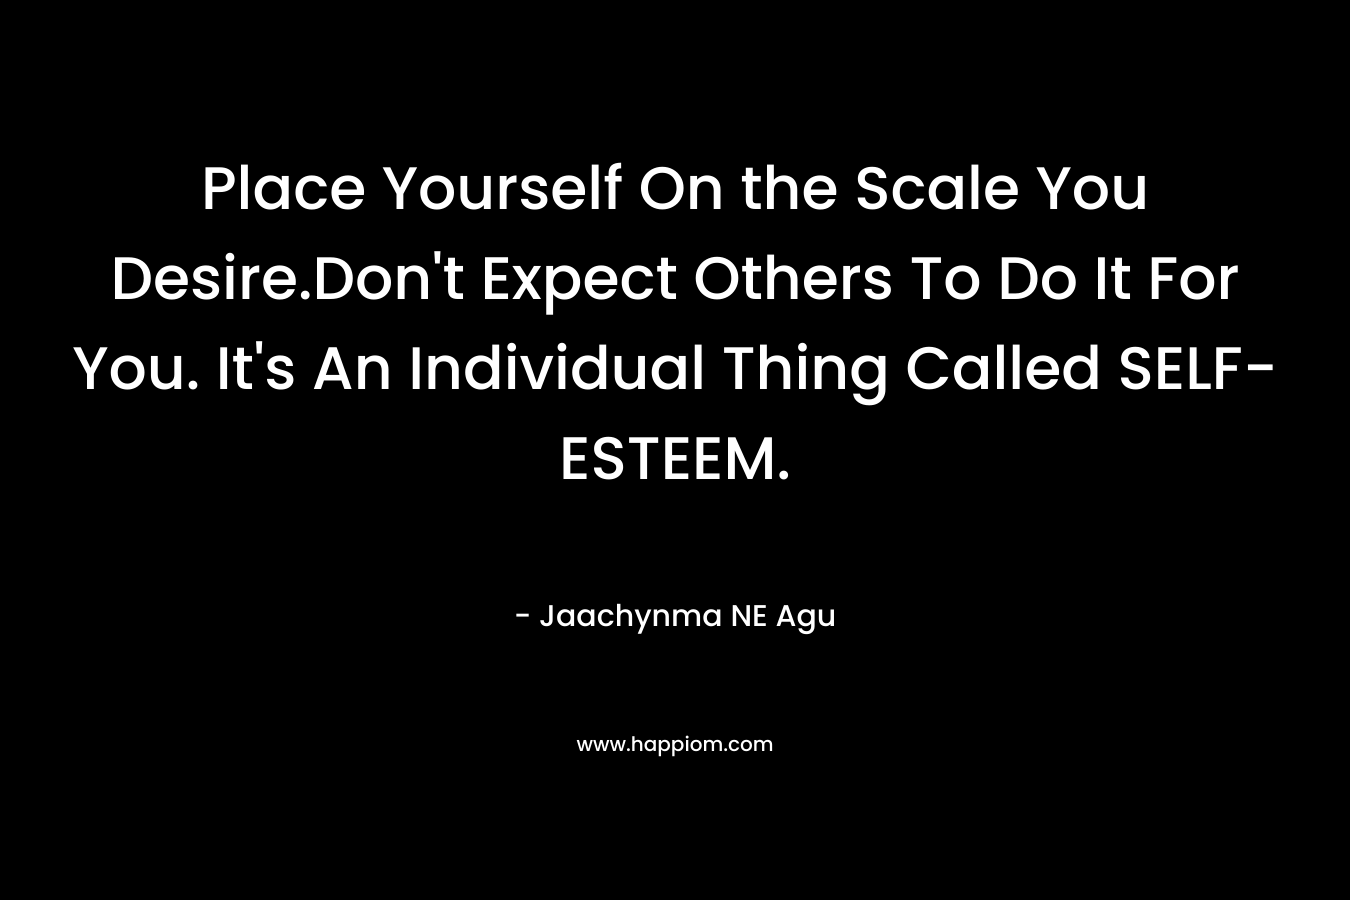 Place Yourself On the Scale You Desire.Don’t Expect Others To Do It For You. It’s An Individual Thing Called SELF-ESTEEM. – Jaachynma NE Agu